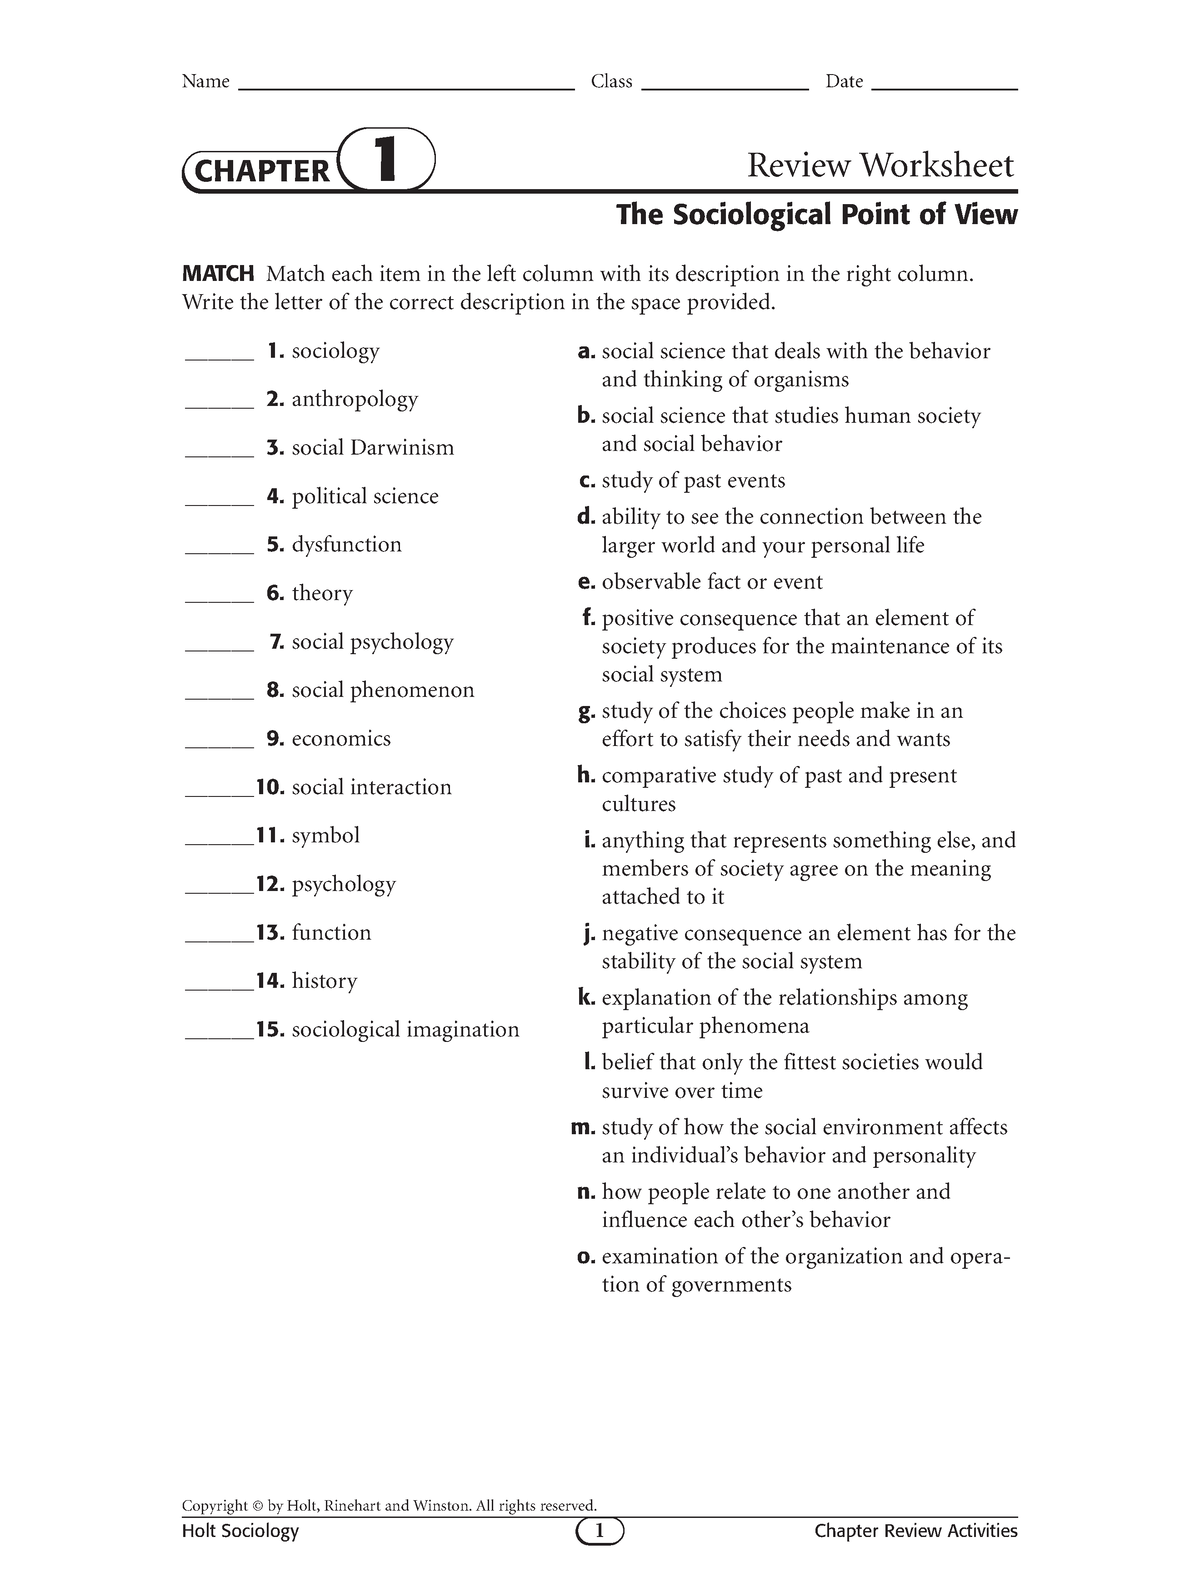 Chapter 1 Review Worksheet The Sociological Point Of View Answer Key